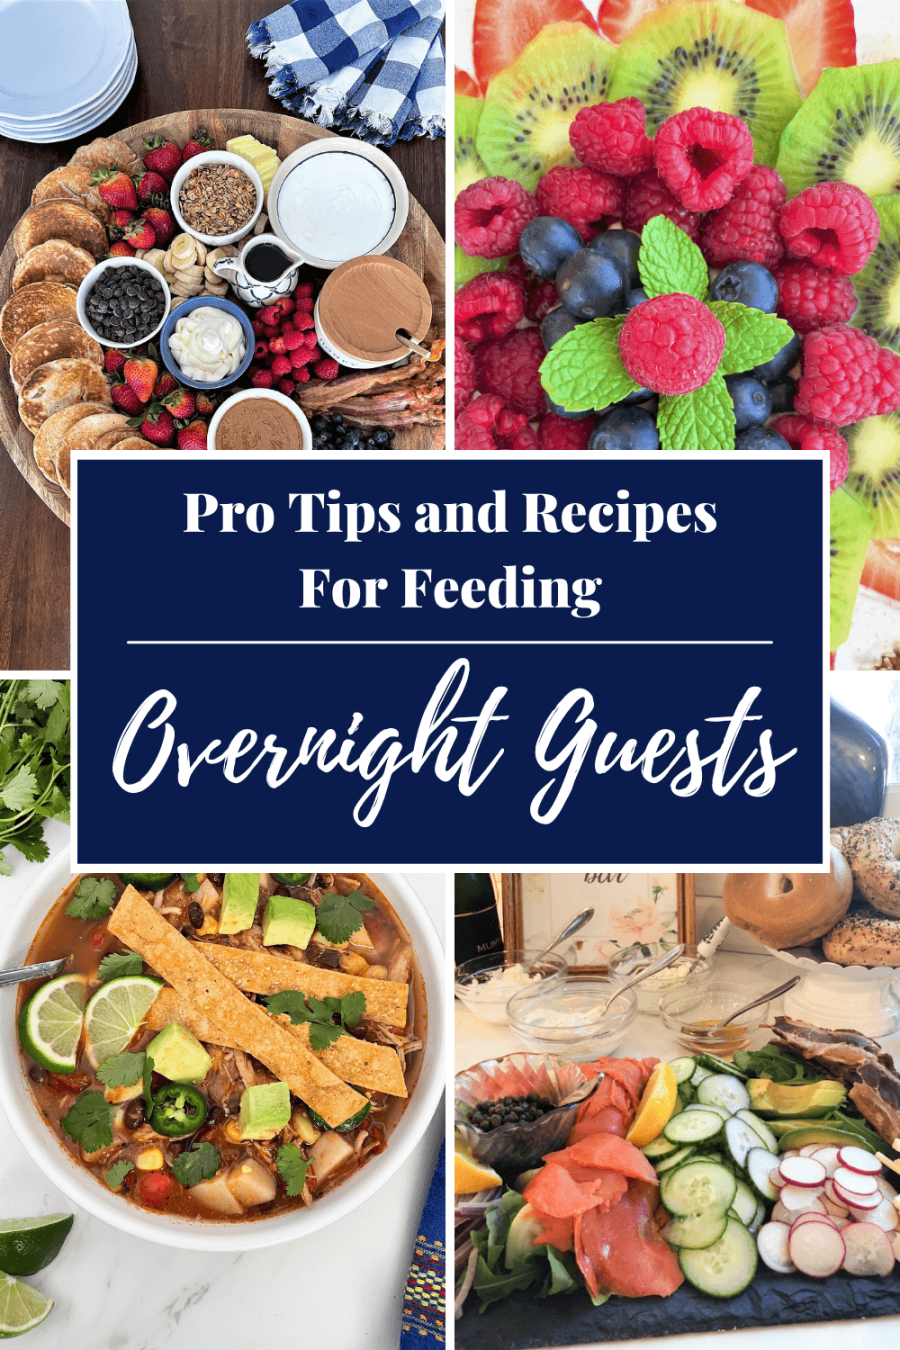 Pro Tips and Recipes For Feeding Overnight Guests - Small Gestures